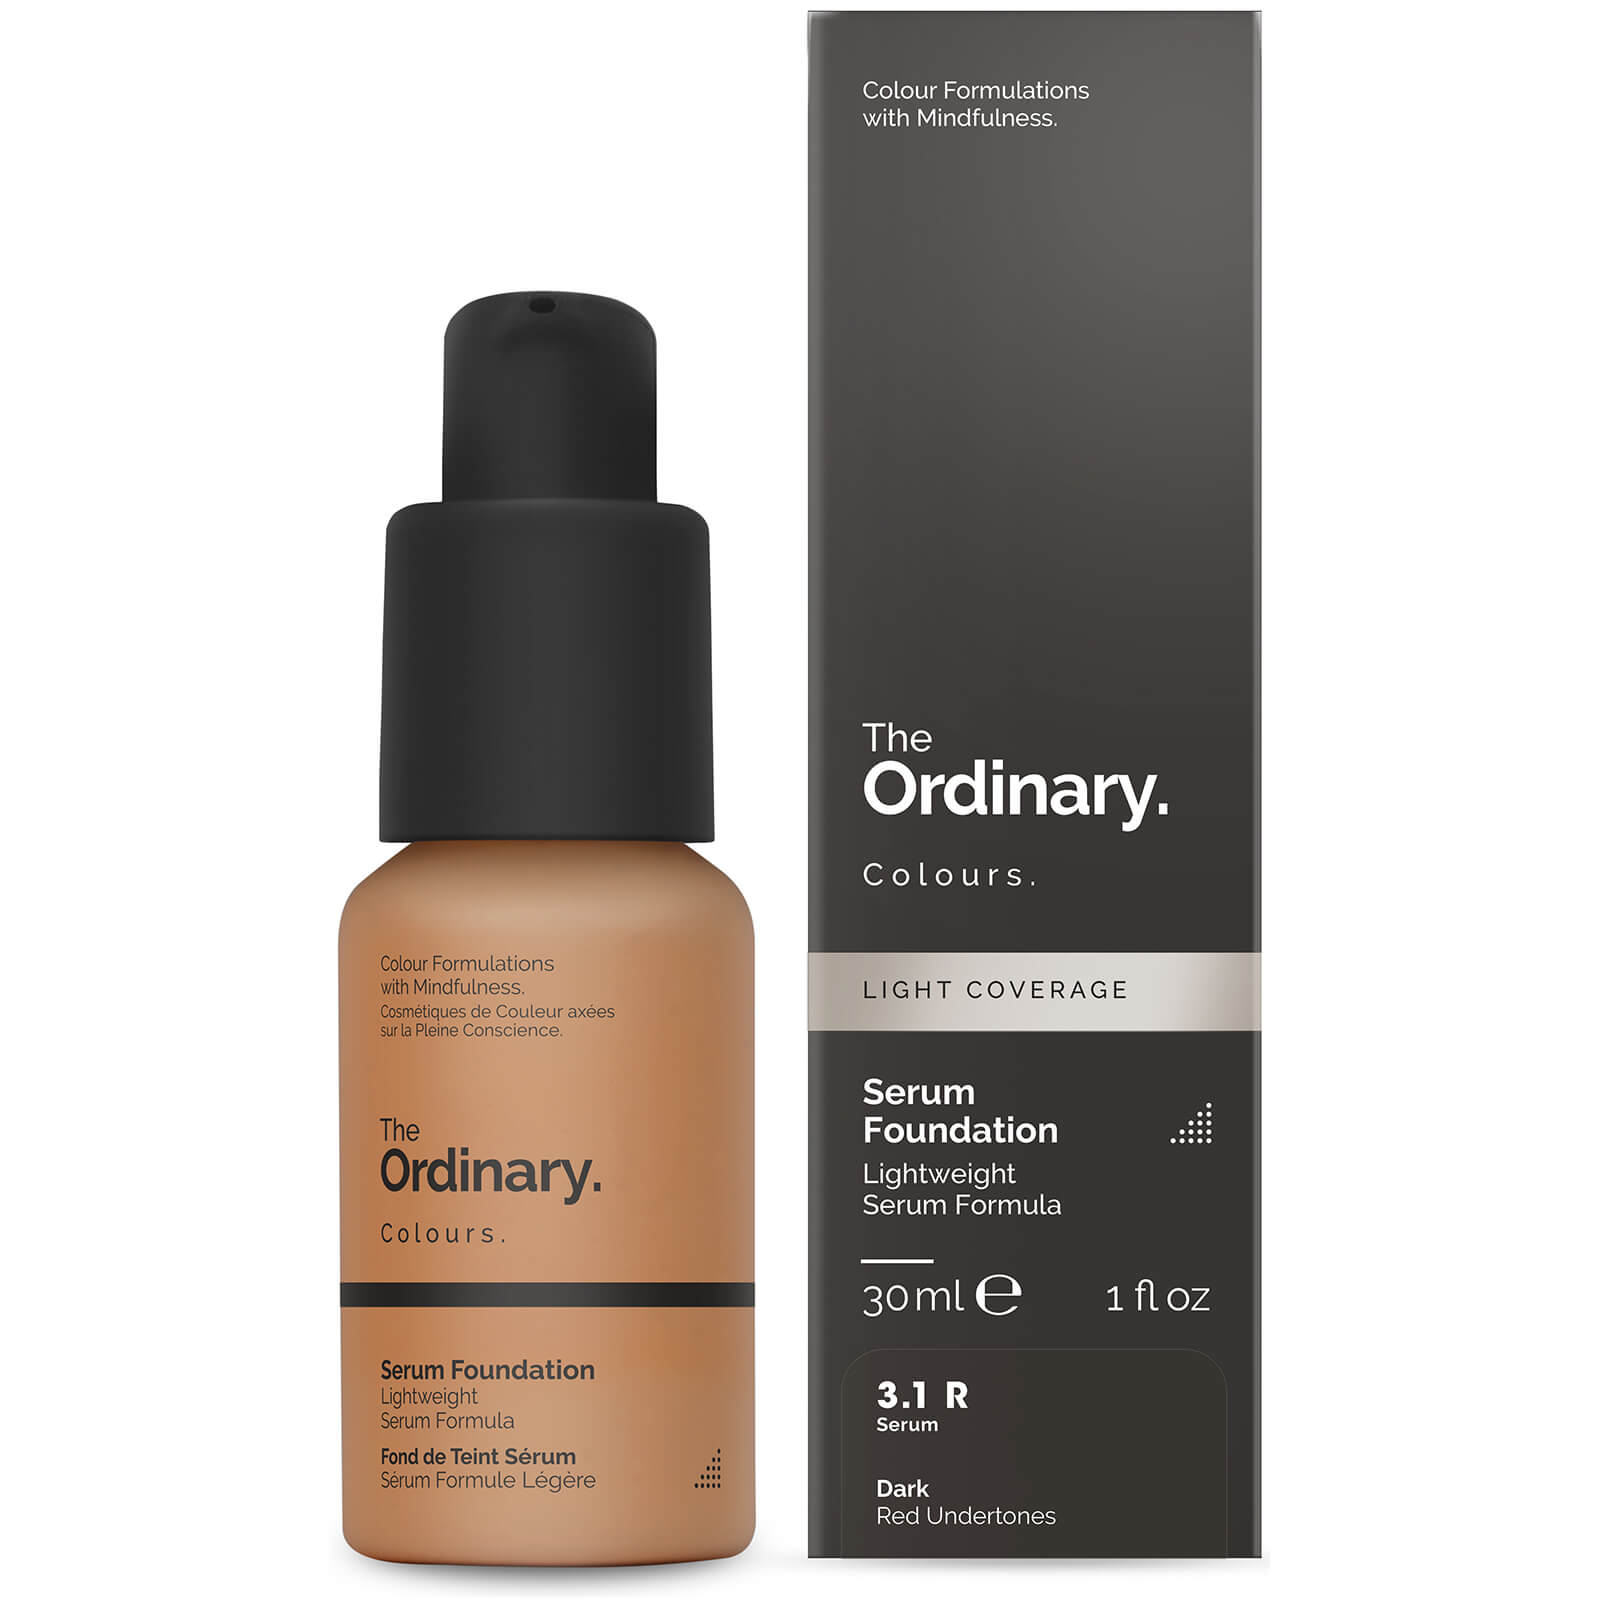 the ordinary serum foundation with spf 15 by the ordinary colours 30ml (various shades) - 3.1r